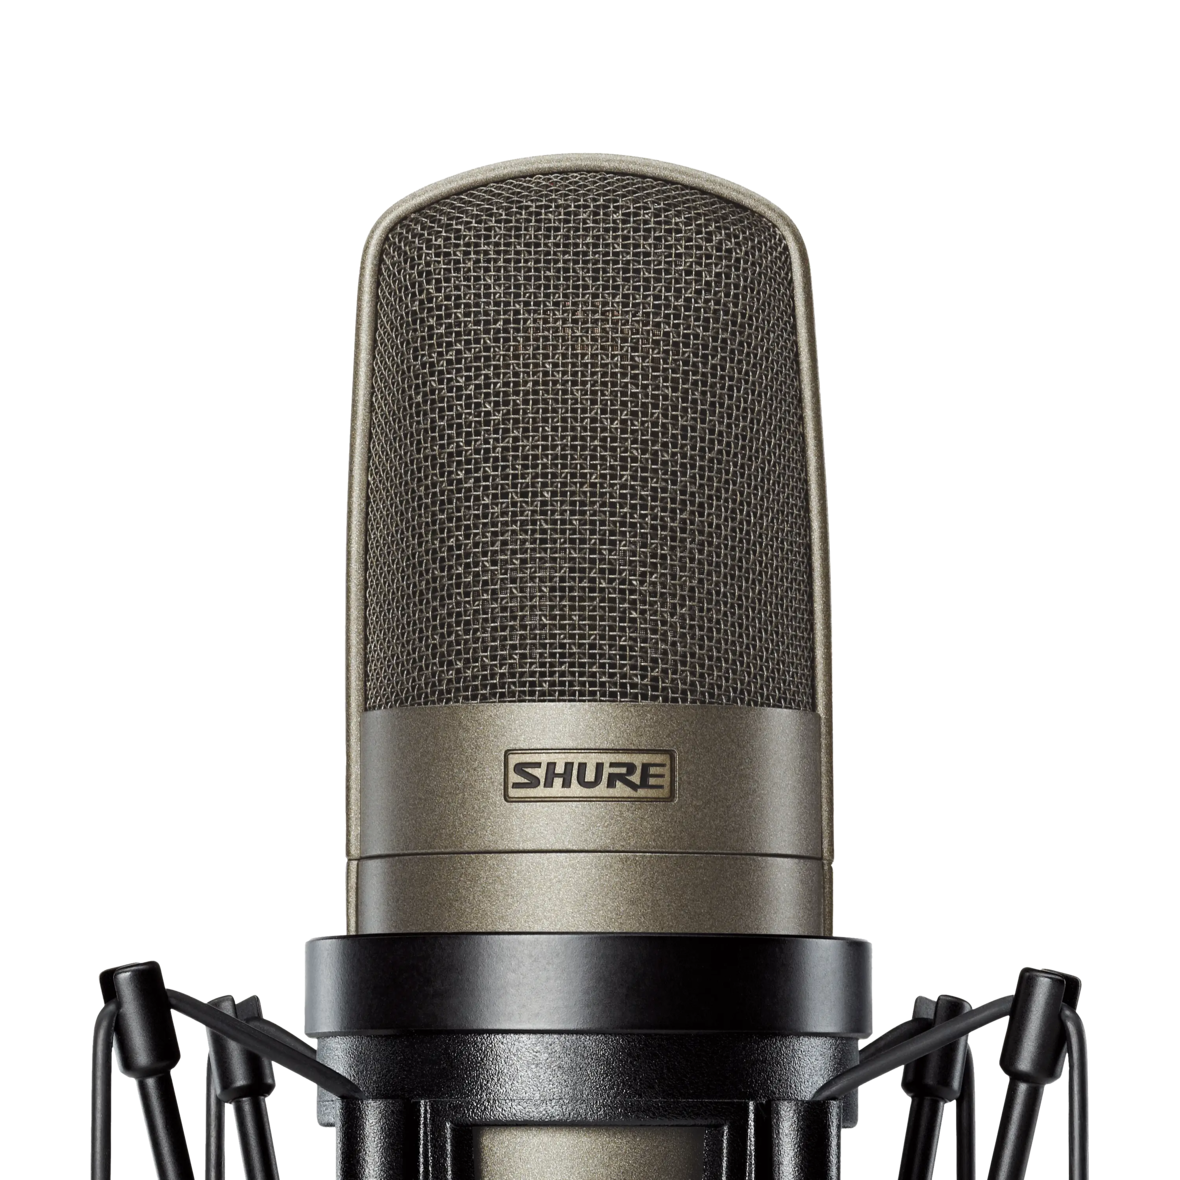 - KSM42 grote dual diafragma microfoon - Shure undefined